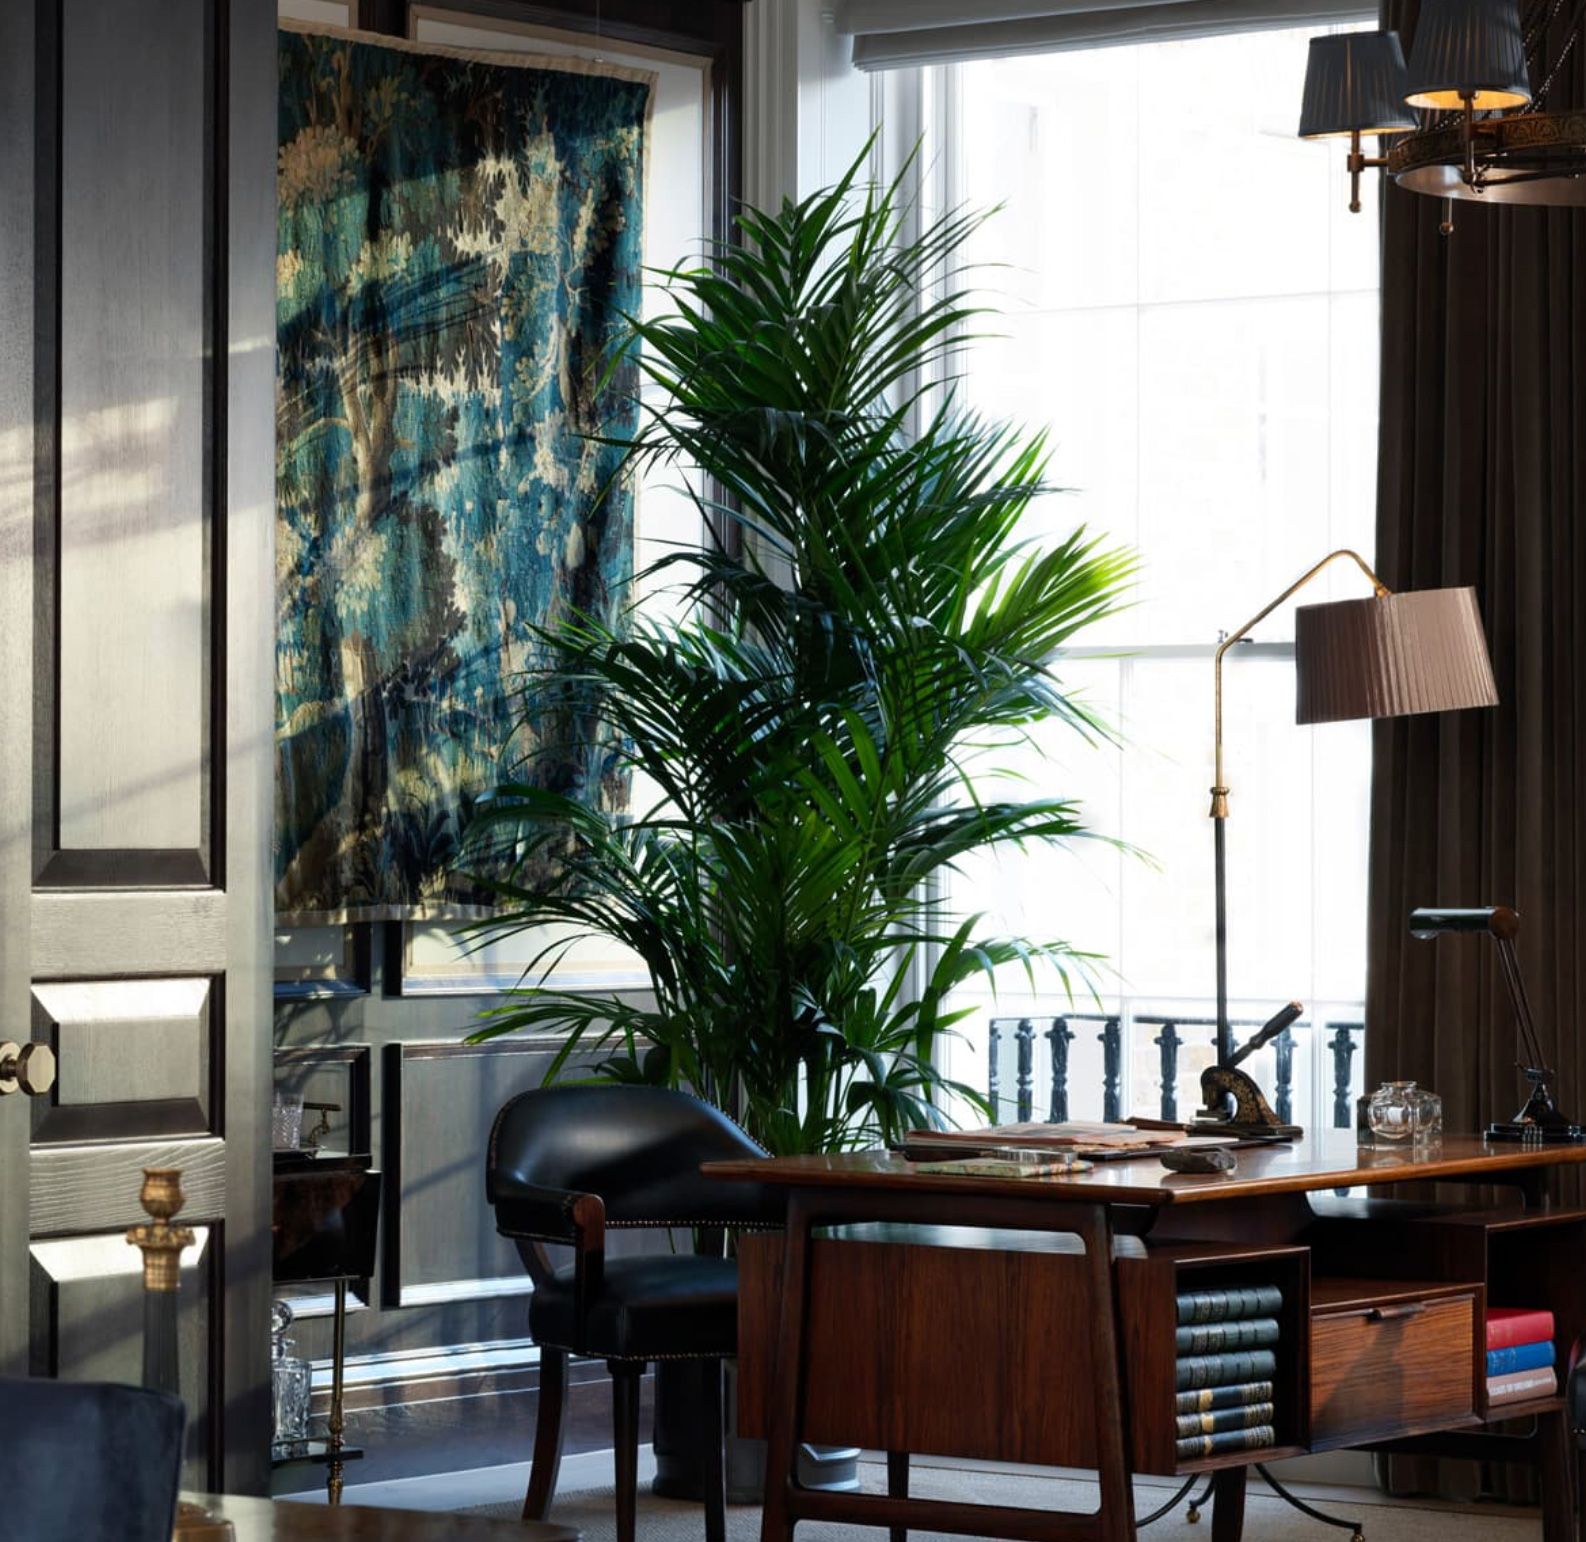 <p>                     If you don’t have the luxury of a great view – or even a window – in your home office, be inspired by Justina Blakeney of Jungalow and make one. If you can fit a selection of houseplants on the far side of the desk, so much the better, but if there’s not space for the real thing, hang or prop a large foliage print in your eye line as the designer has done for her own studio desk.                    </p>                                      <p>                     Can’t find the right image? Follow Justina’s lead and take your own photos of foliage and have them printed at super scale and framed for a window-style outlook from the desk.                   </p>                                      <p>                     The room above demonstrates the plant-first approach perfectly. It was designed by Albion Nord as part of a project in London.                   </p>